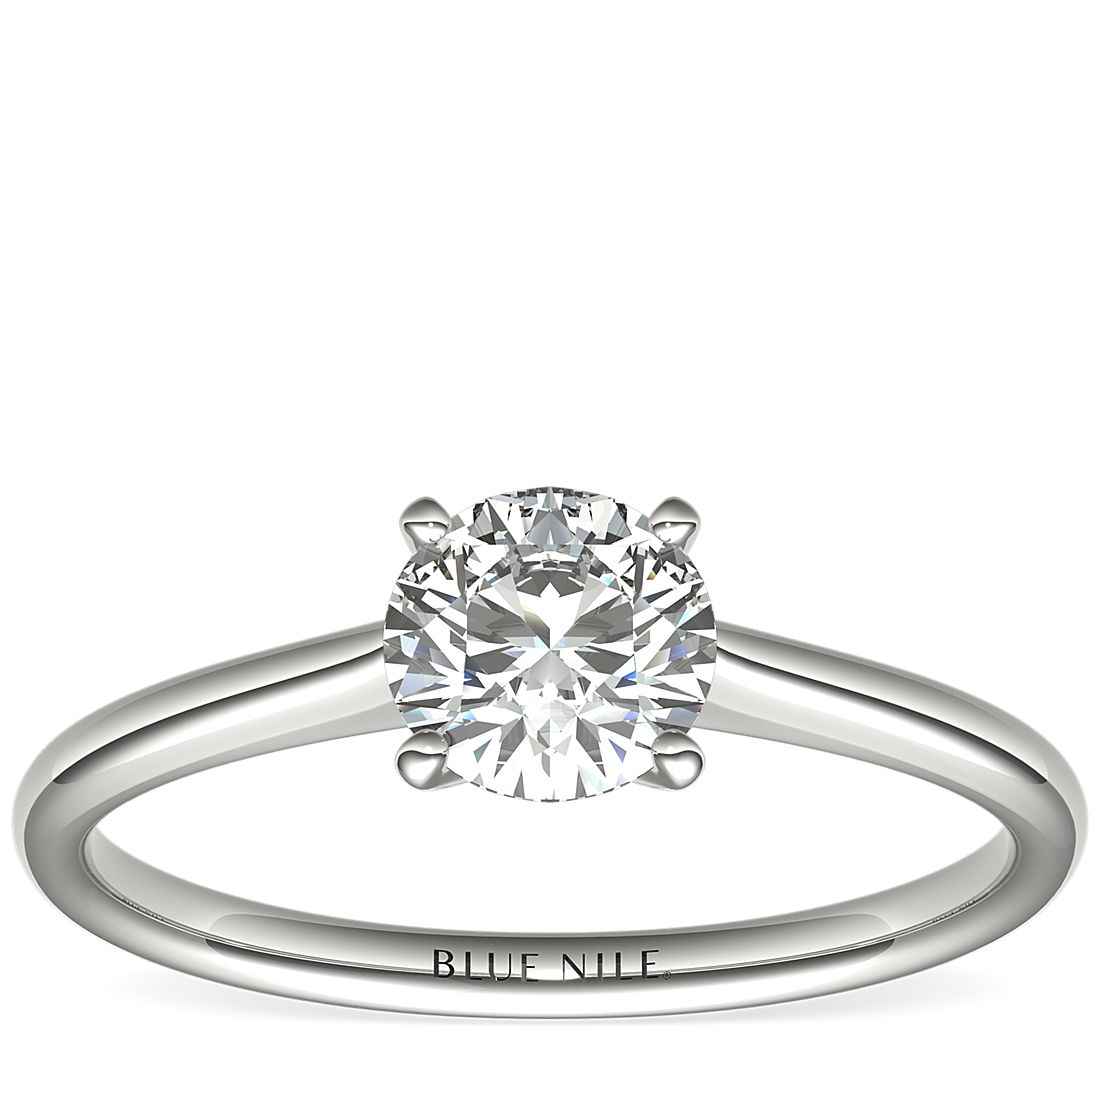 3 4 solitaire engagement ring set intersection